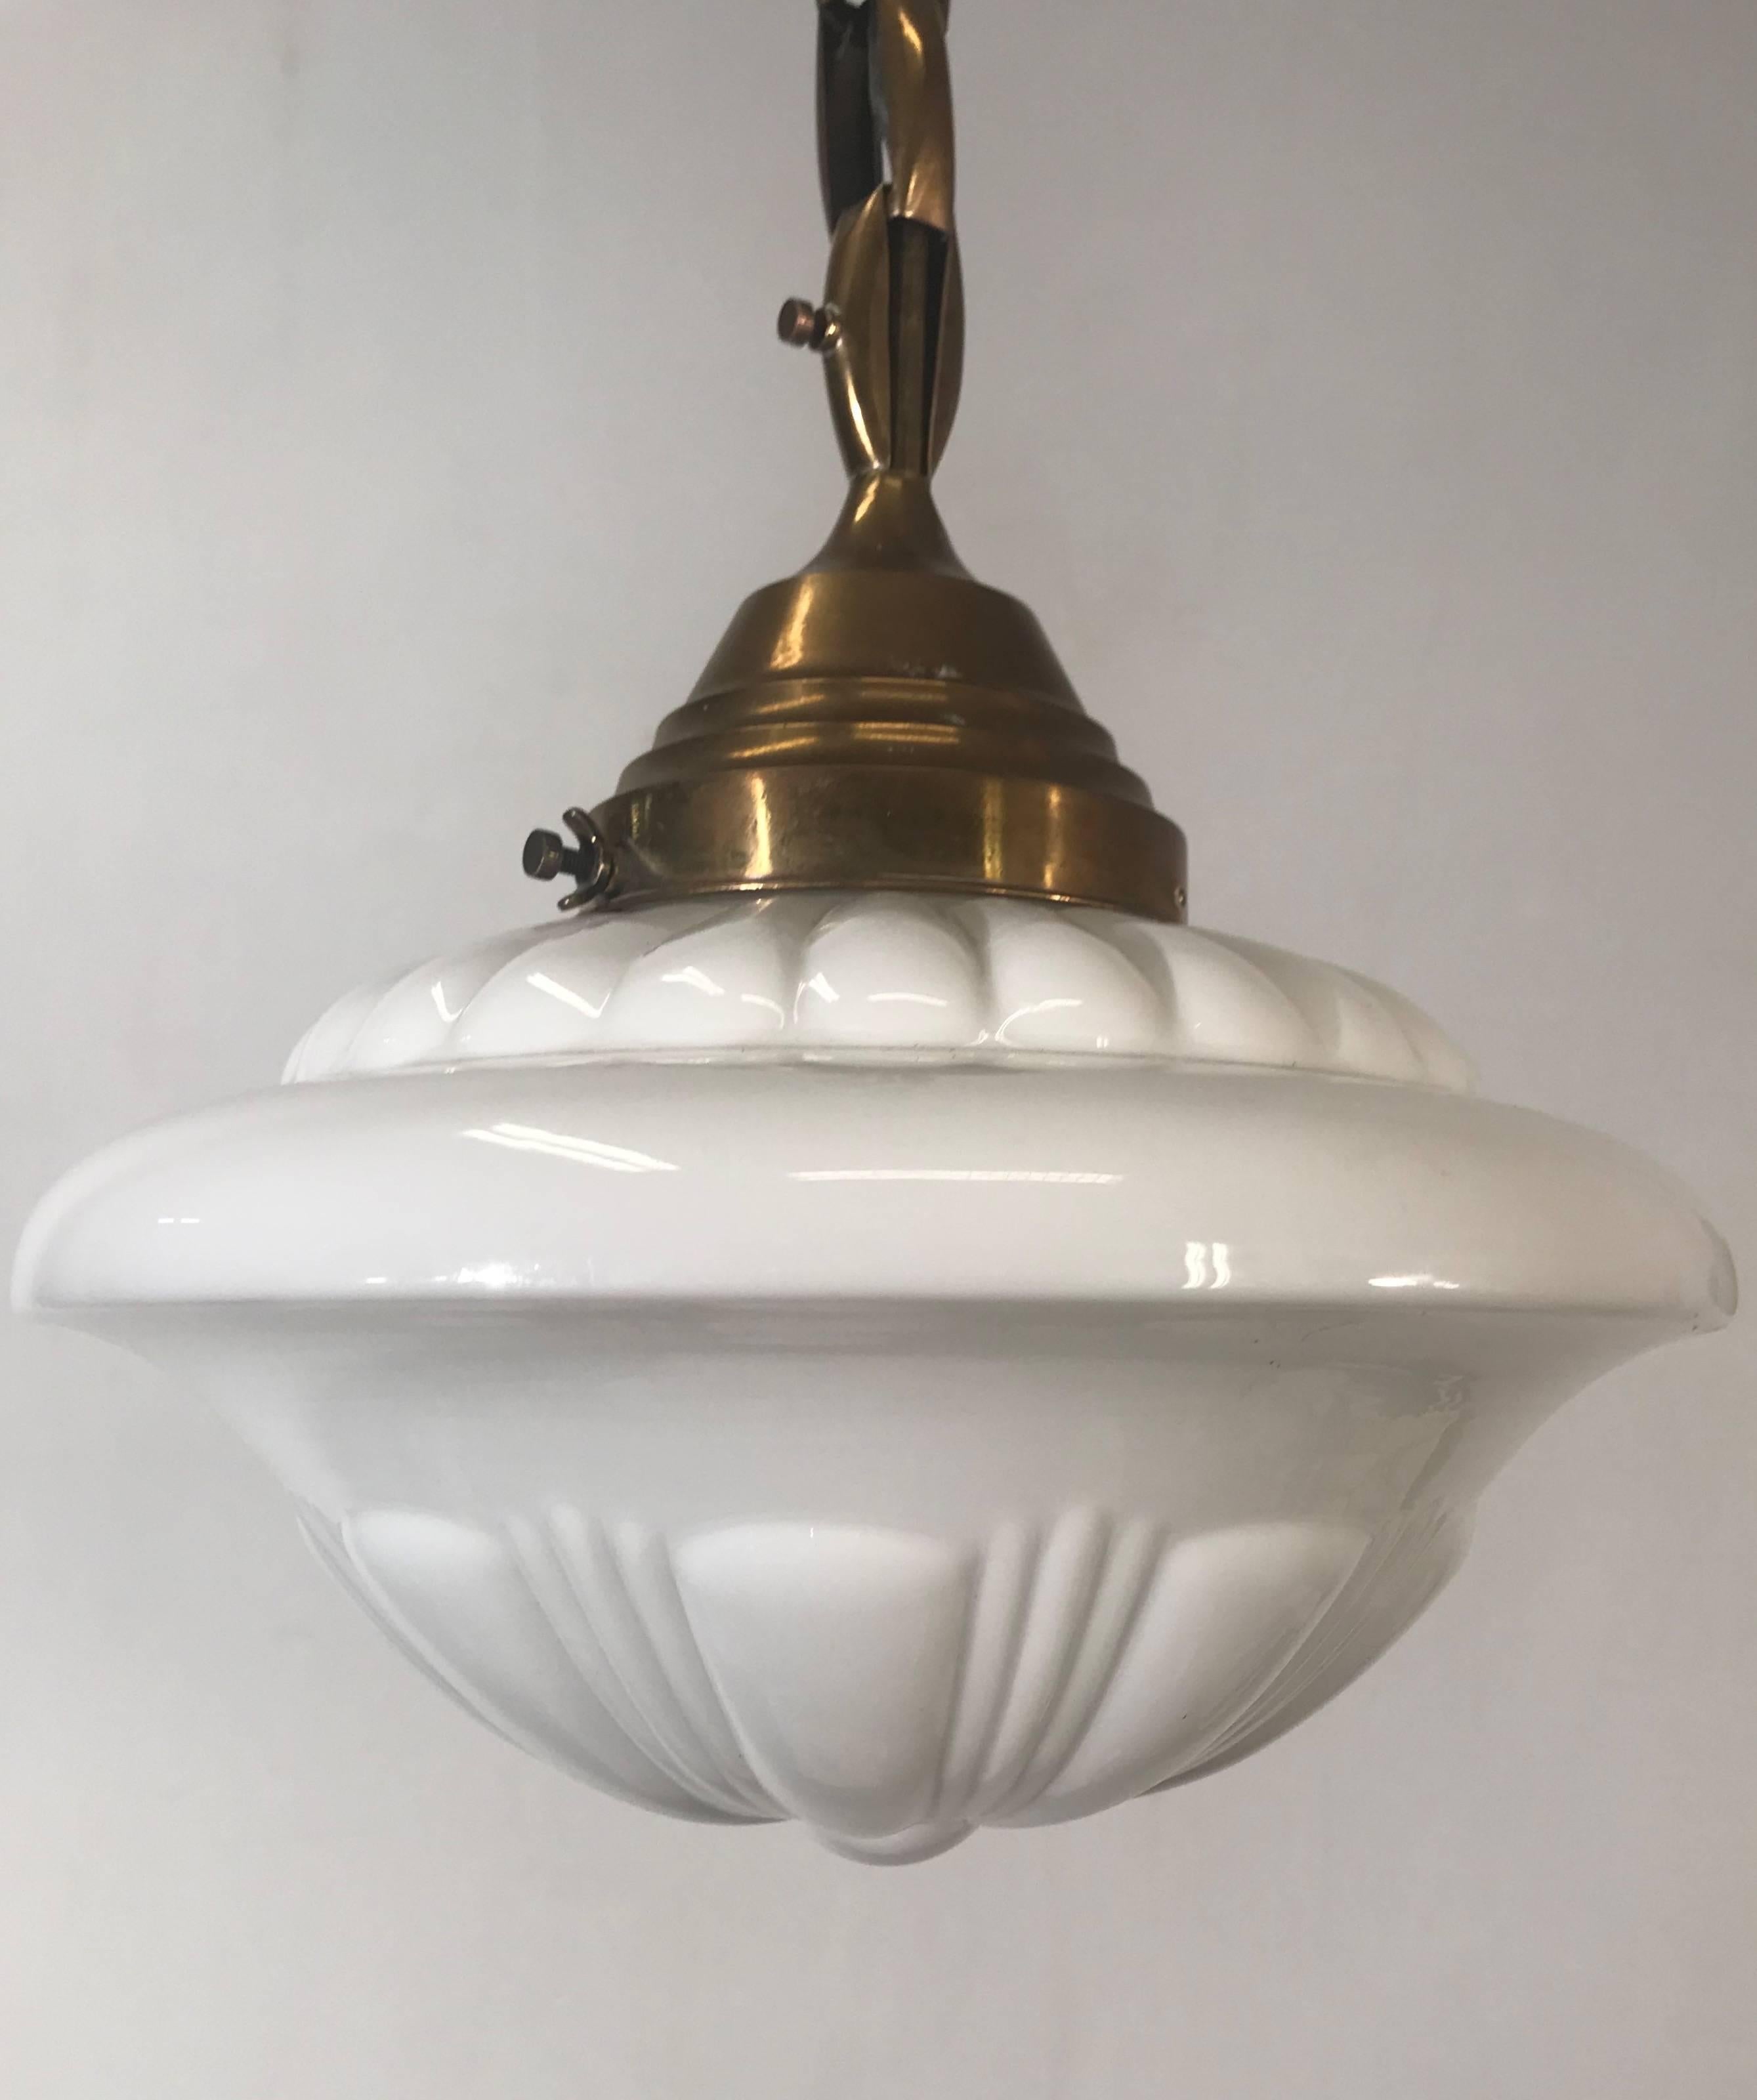 Early 1900s Rare Art Deco Pendant / Light Fixture with Glass Shade & Brass Chain 6